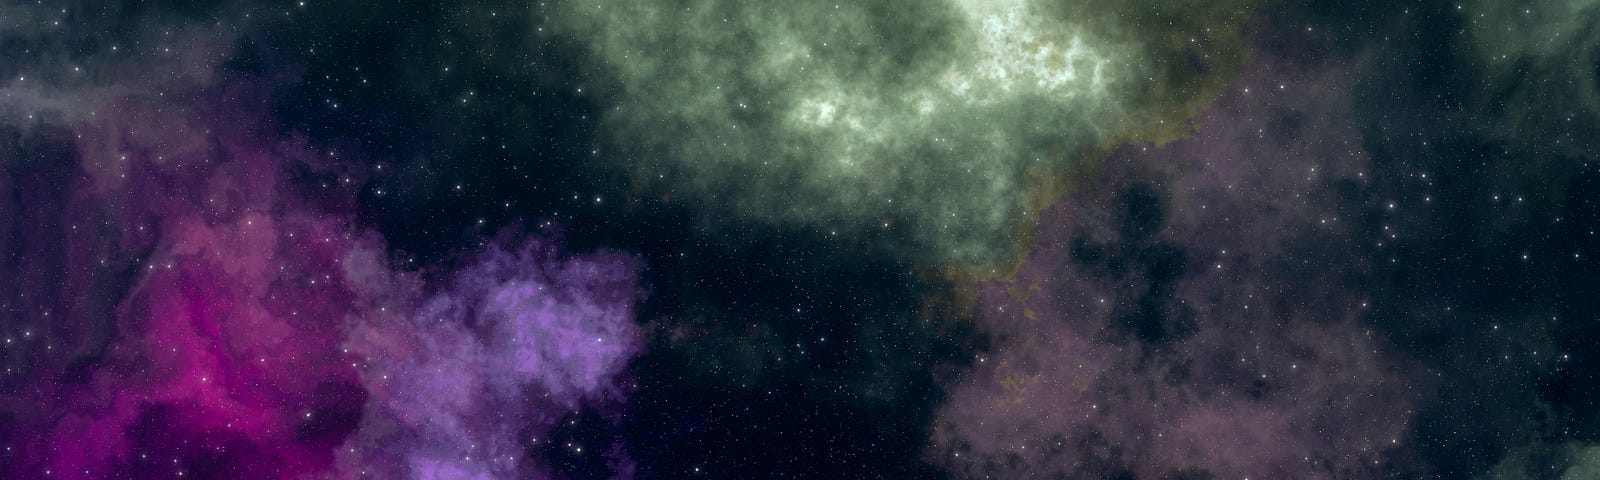 A photo of the universe, with colorful gases and dust.